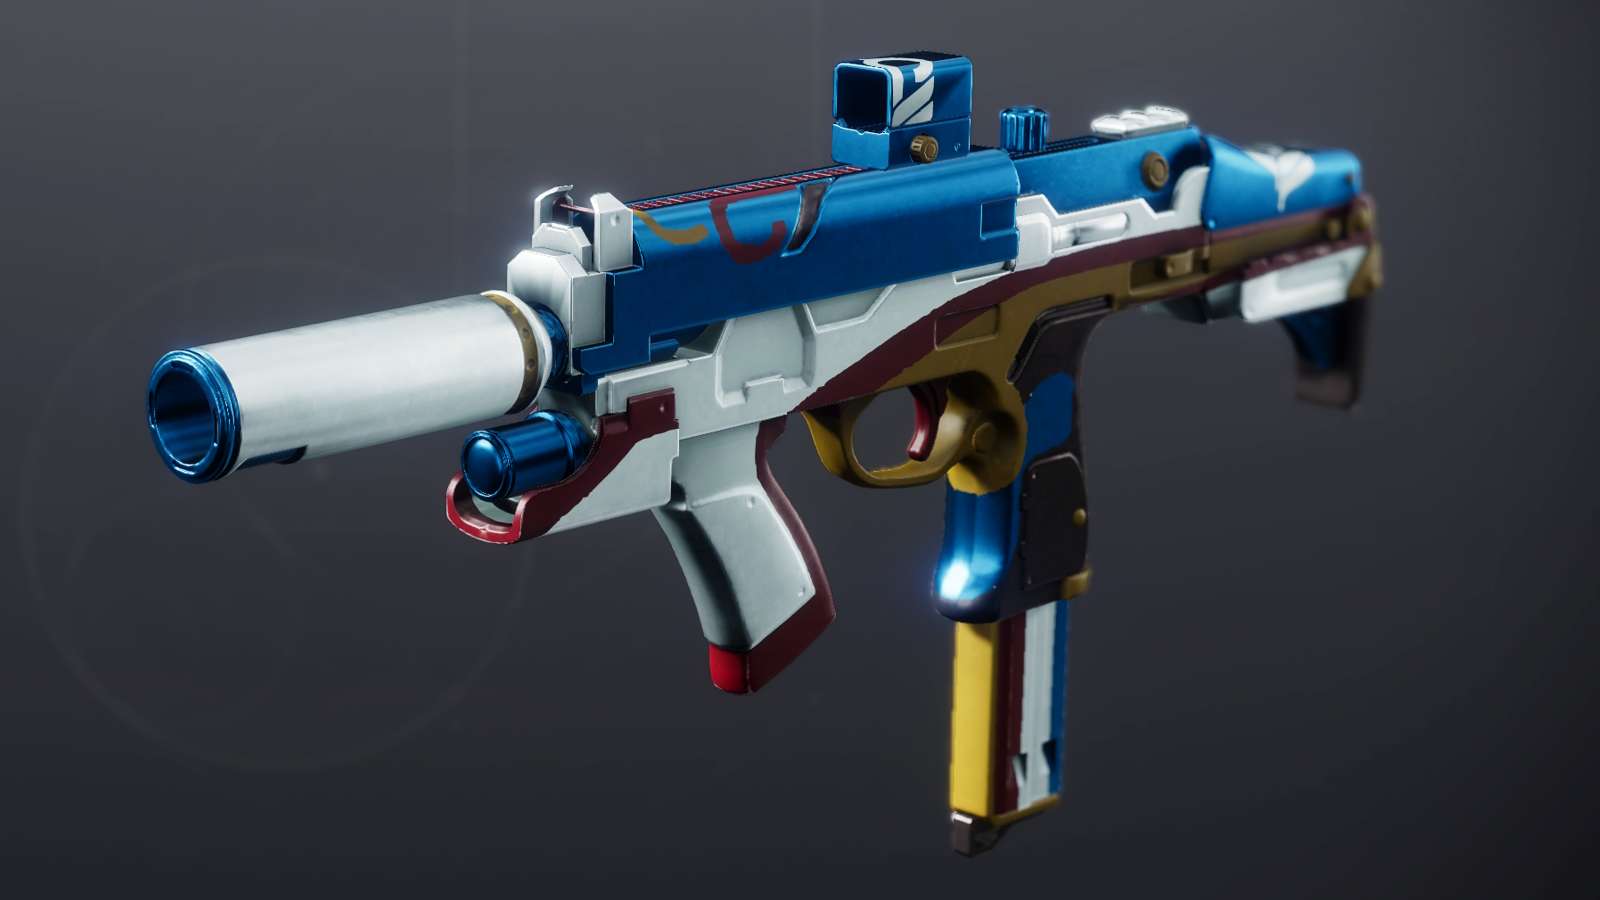 the title legendary smg from destiny 2's season 20 guardian games event.